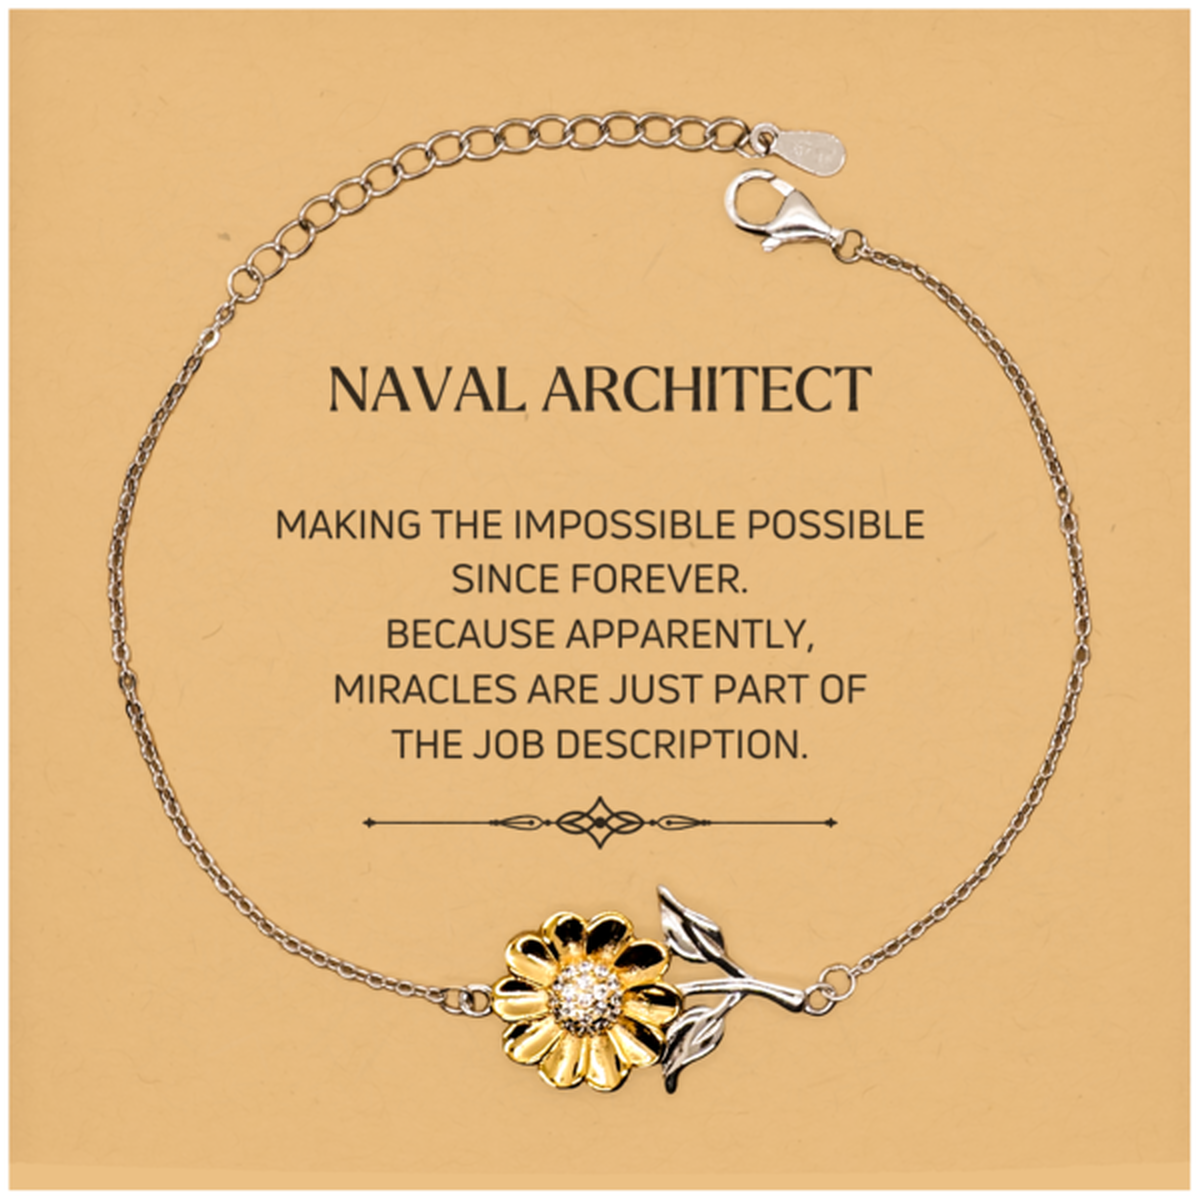 Funny Naval Architect Gifts, Miracles are just part of the job description, Inspirational Birthday Christmas Sunflower Bracelet For Naval Architect, Men, Women, Coworkers, Friends, Boss